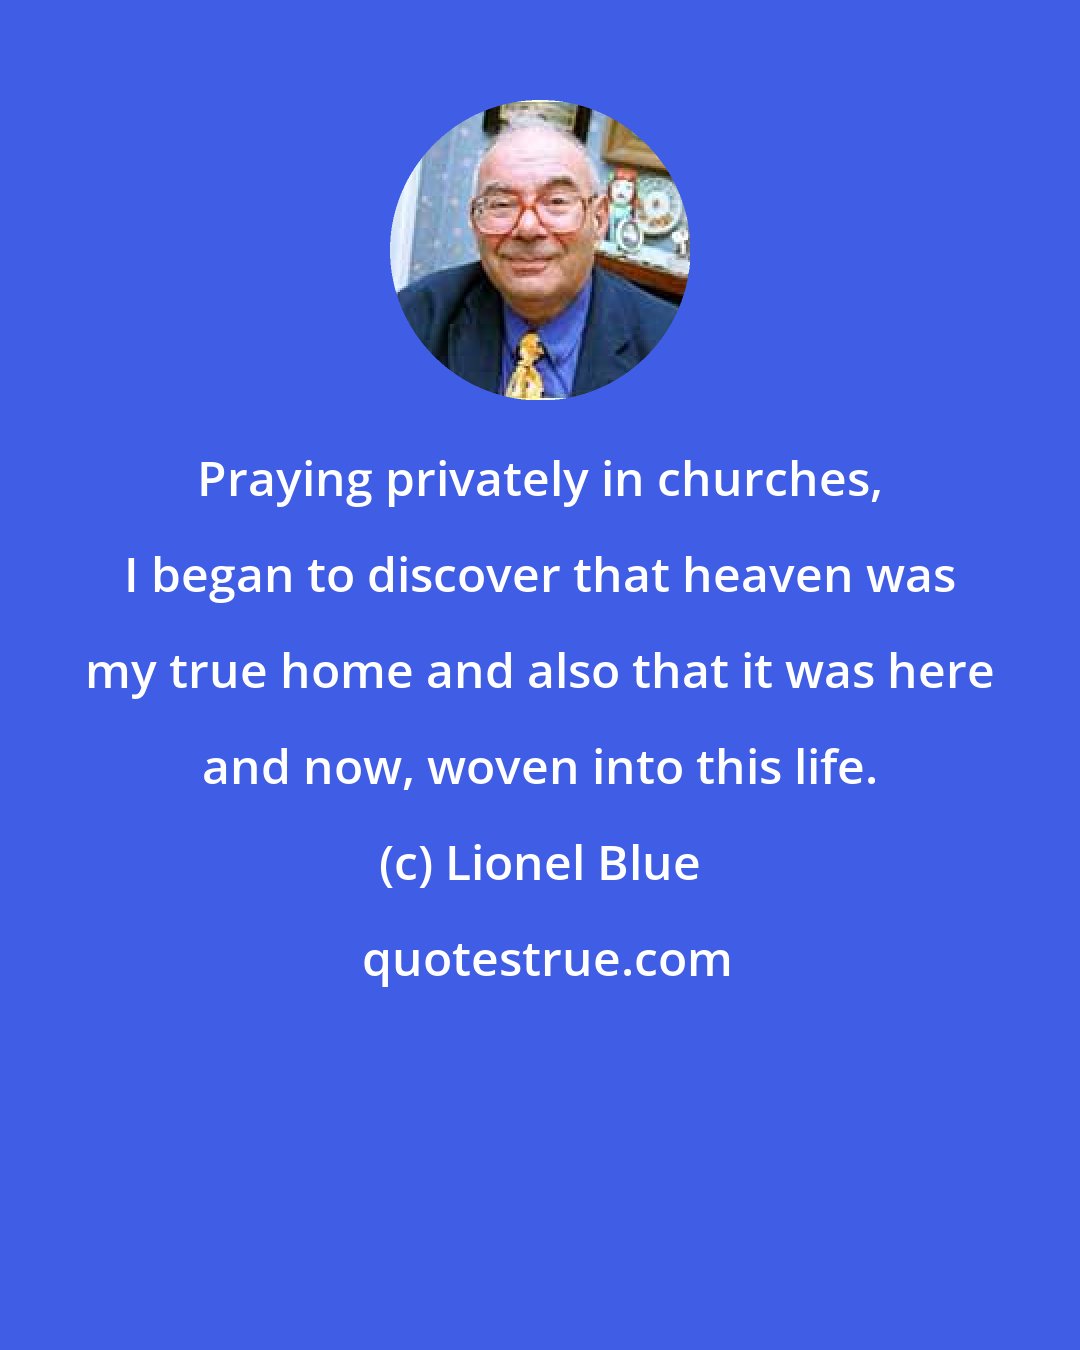 Lionel Blue: Praying privately in churches, I began to discover that heaven was my true home and also that it was here and now, woven into this life.